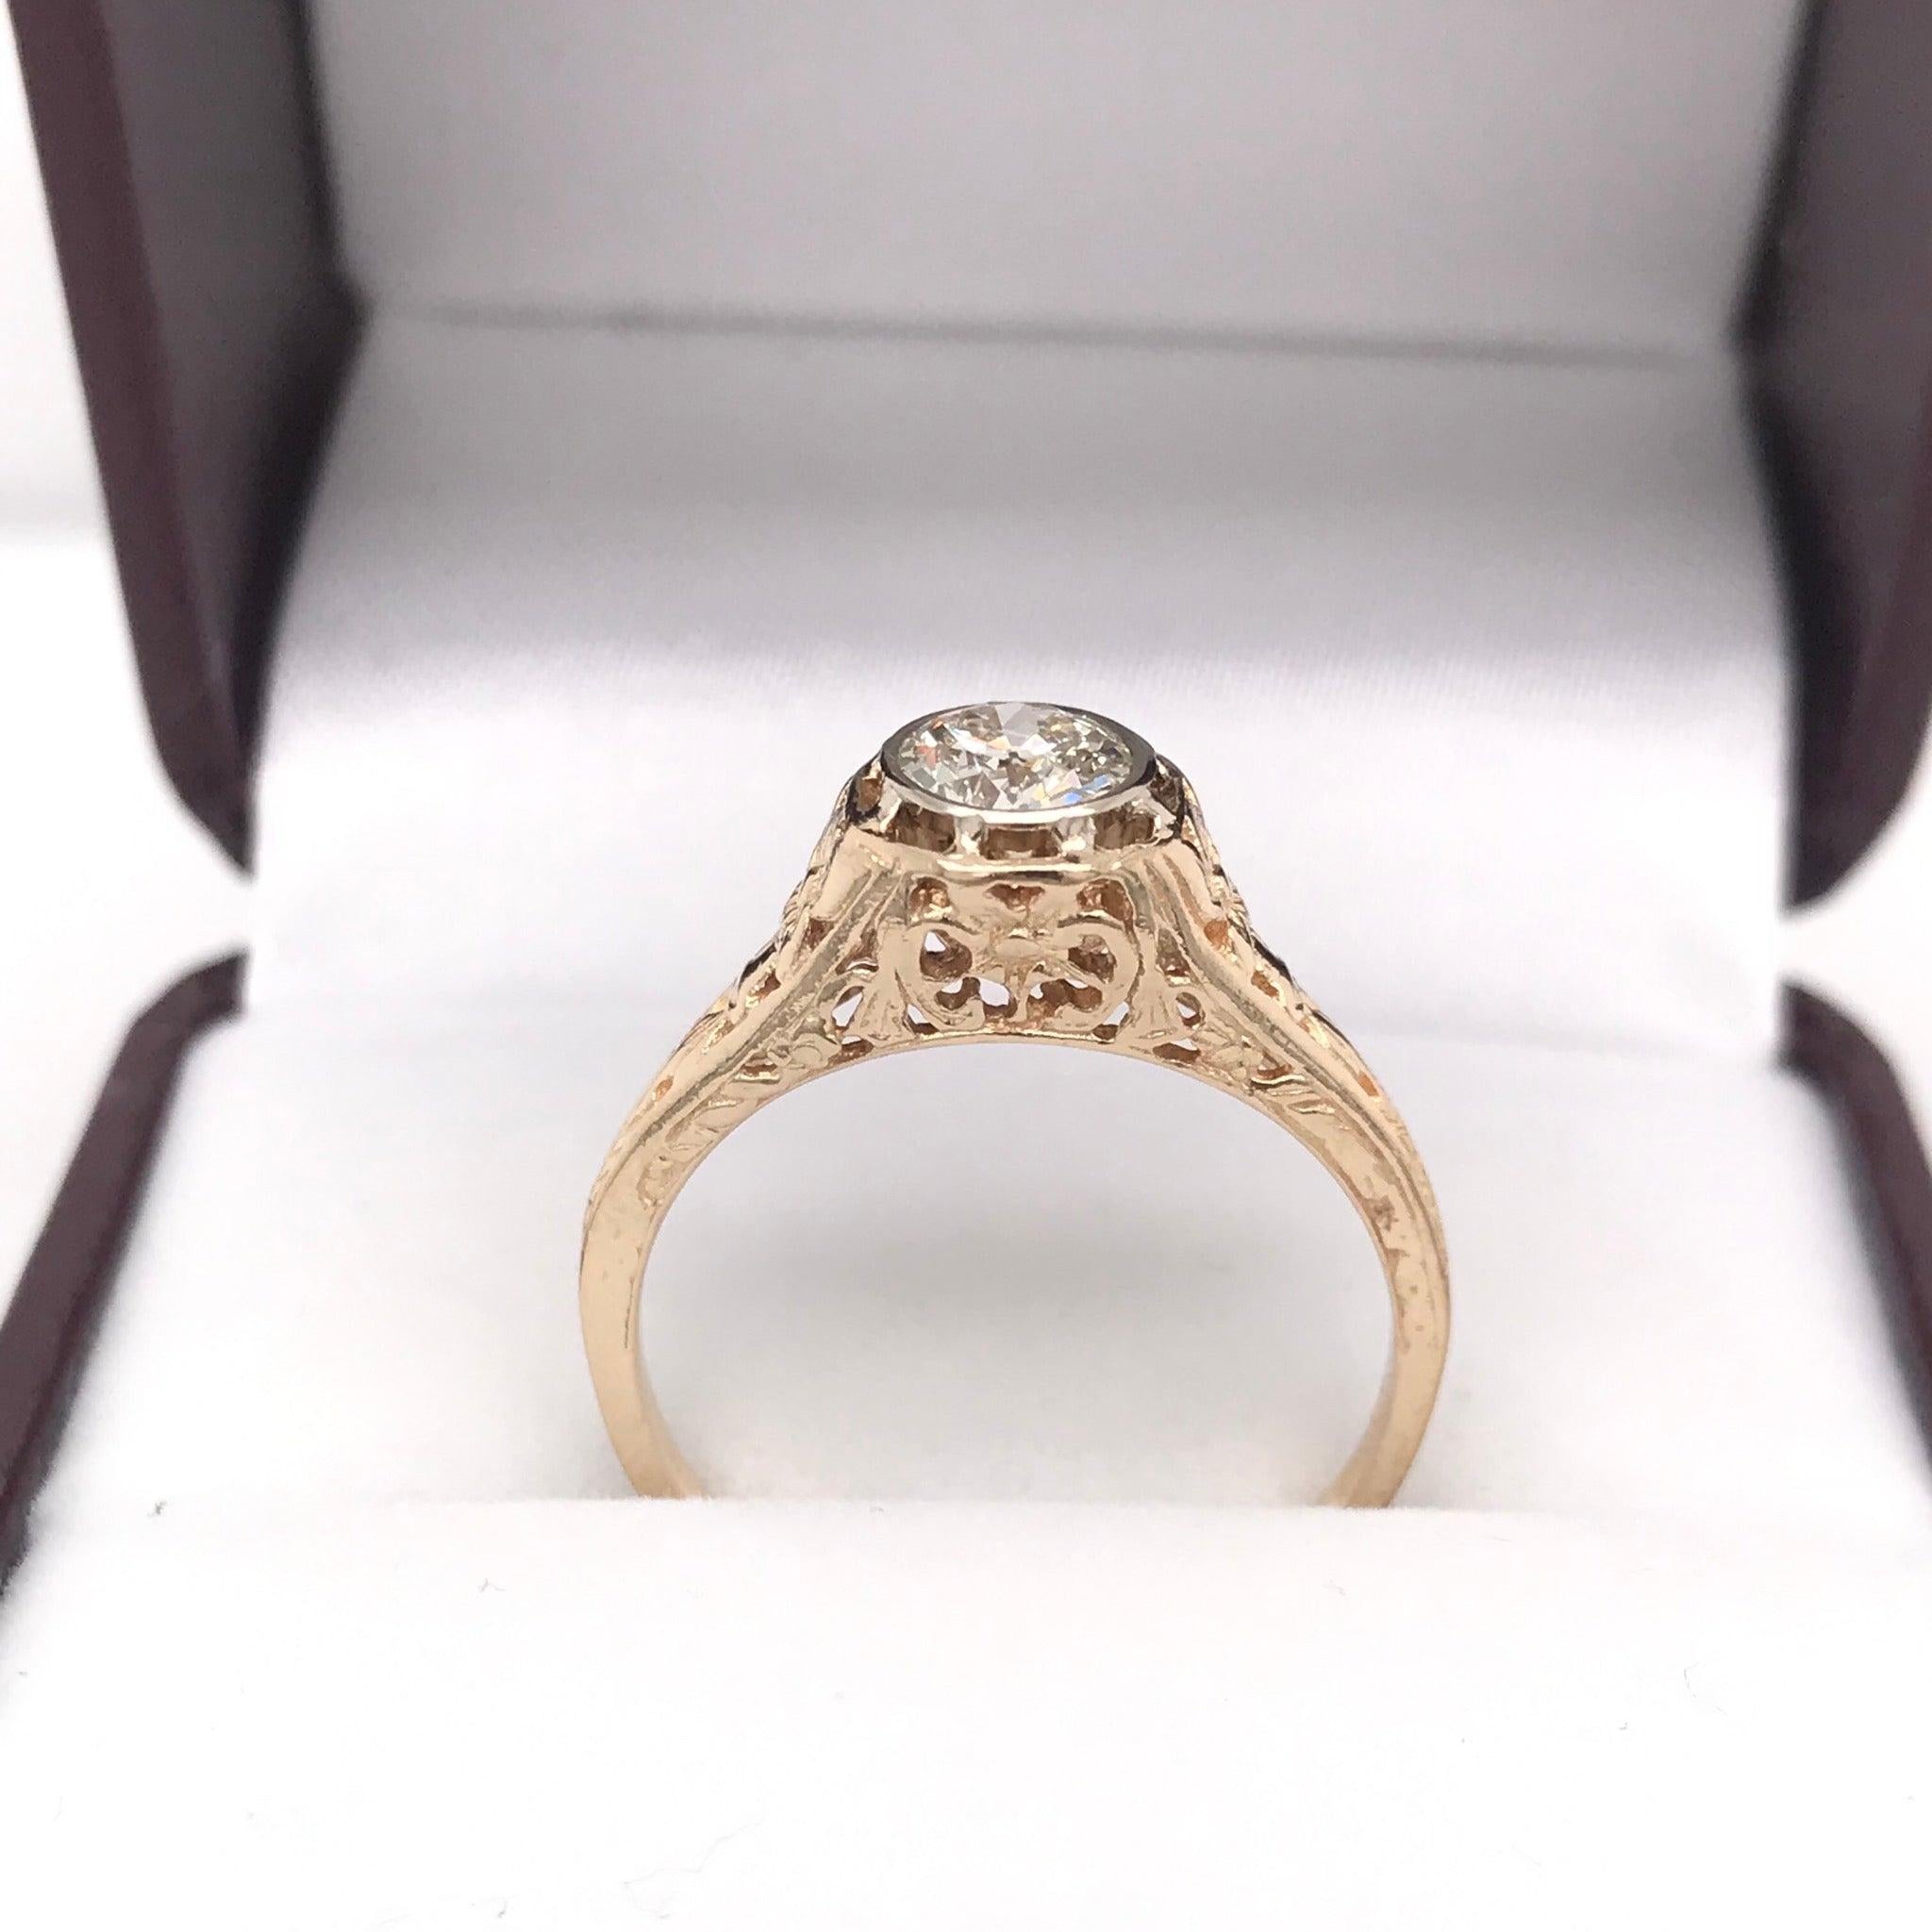 Edwardian 0.5 Carat Diamond Ring 14K Yellow Gold In Good Condition For Sale In Montgomery, AL